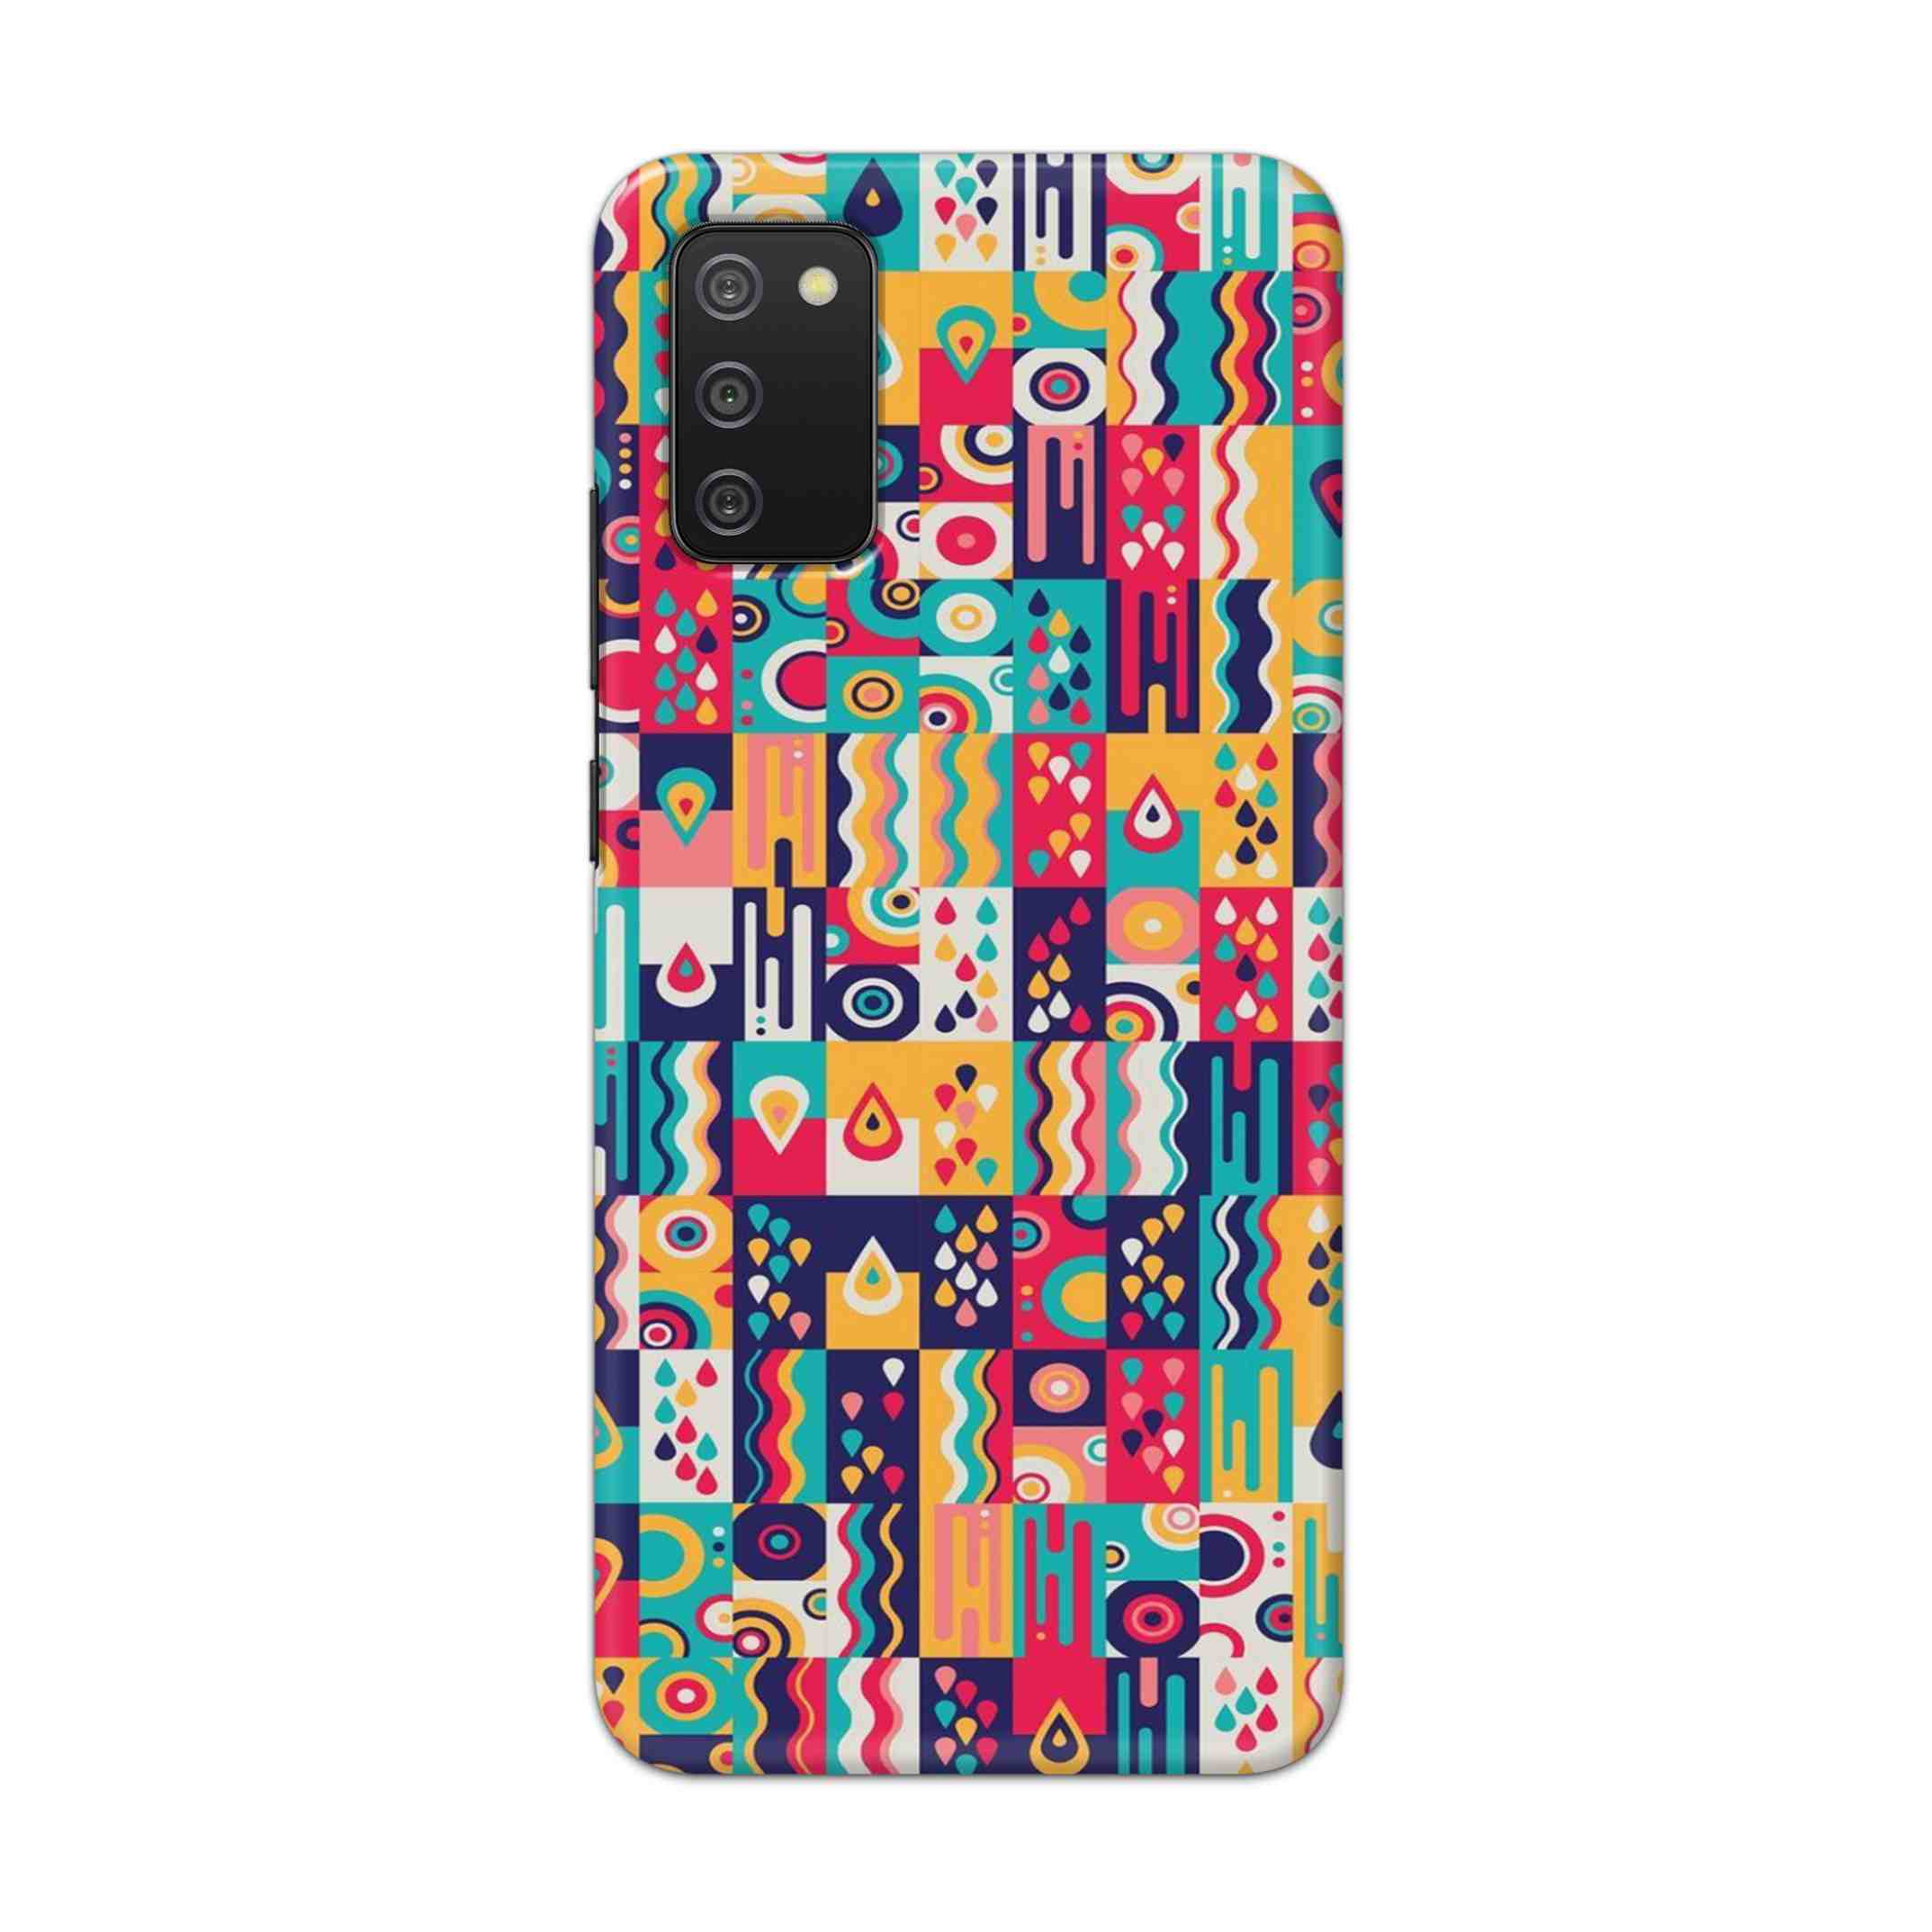 Buy Art Hard Back Mobile Phone Case Cover For Samsung Galaxy M02s Online